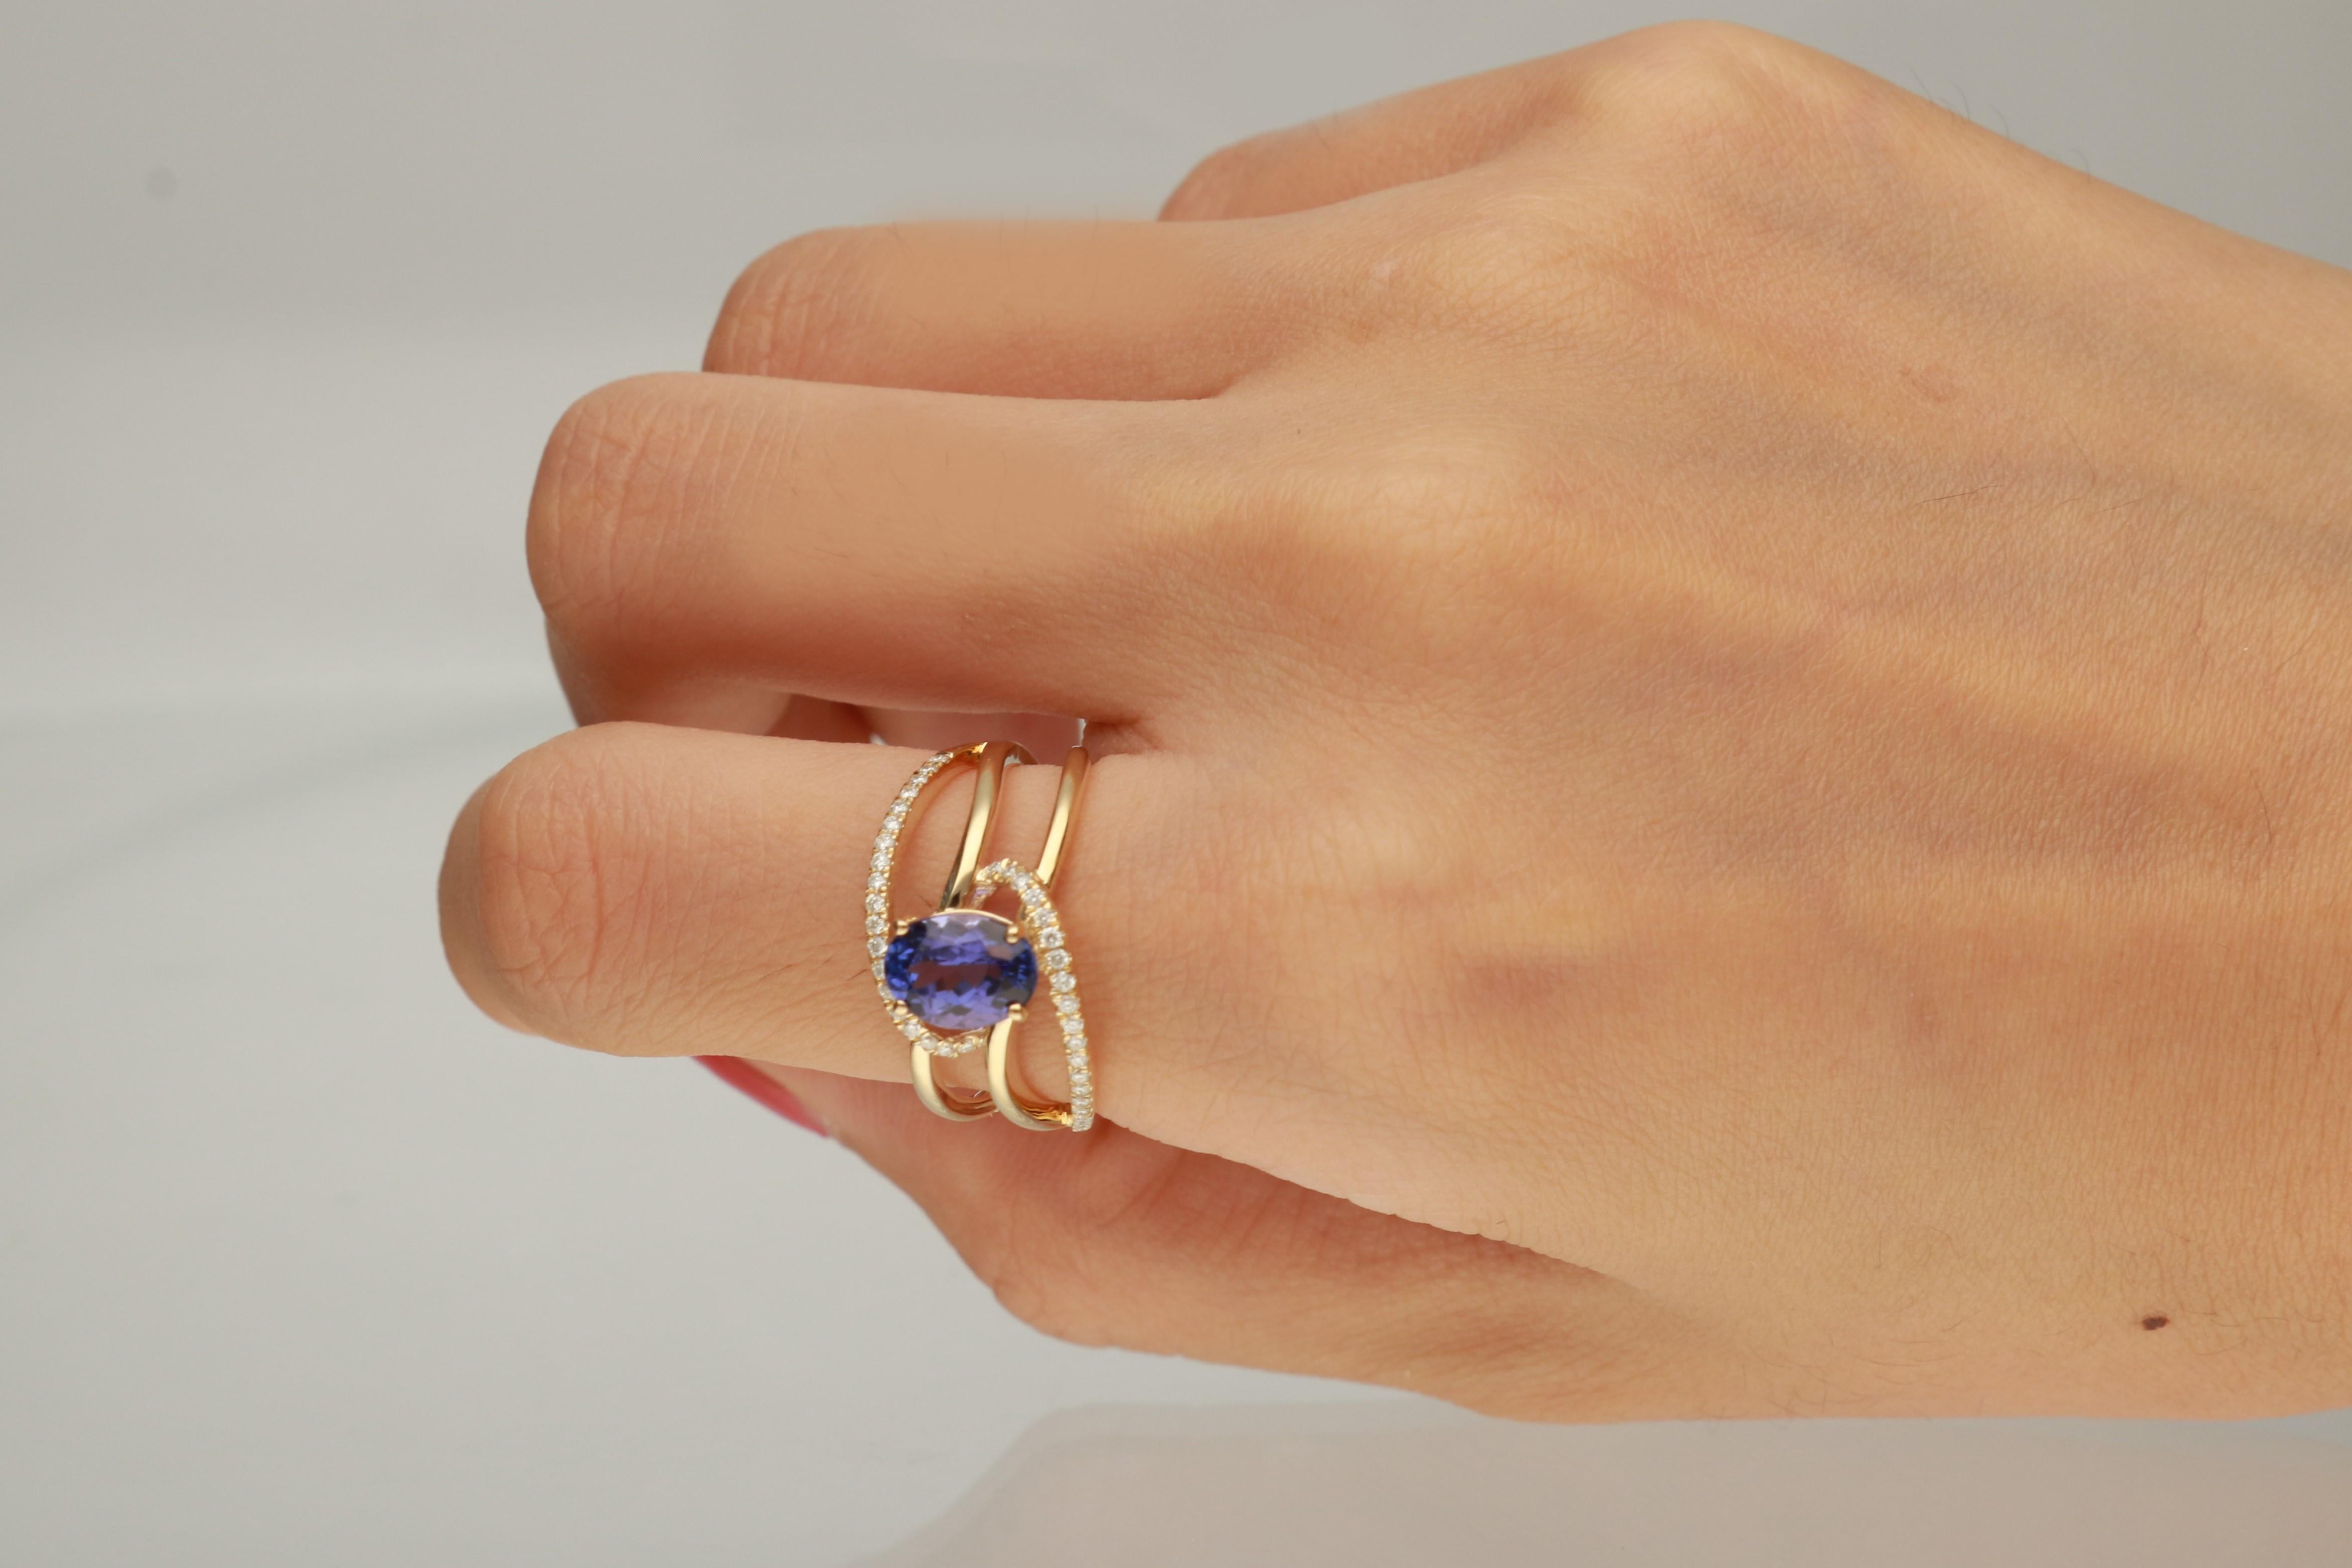 This beautiful Tanzanite Ring is crafted in 14-karat Yellow gold and features a 1.33 carat oval cut Genuine Tanzanite, 38 Round White Diamonds in GH- I1 quality with 0.19 ct. in a prong-setting. This Rings comes in in sizes 6 to 9, and it is a